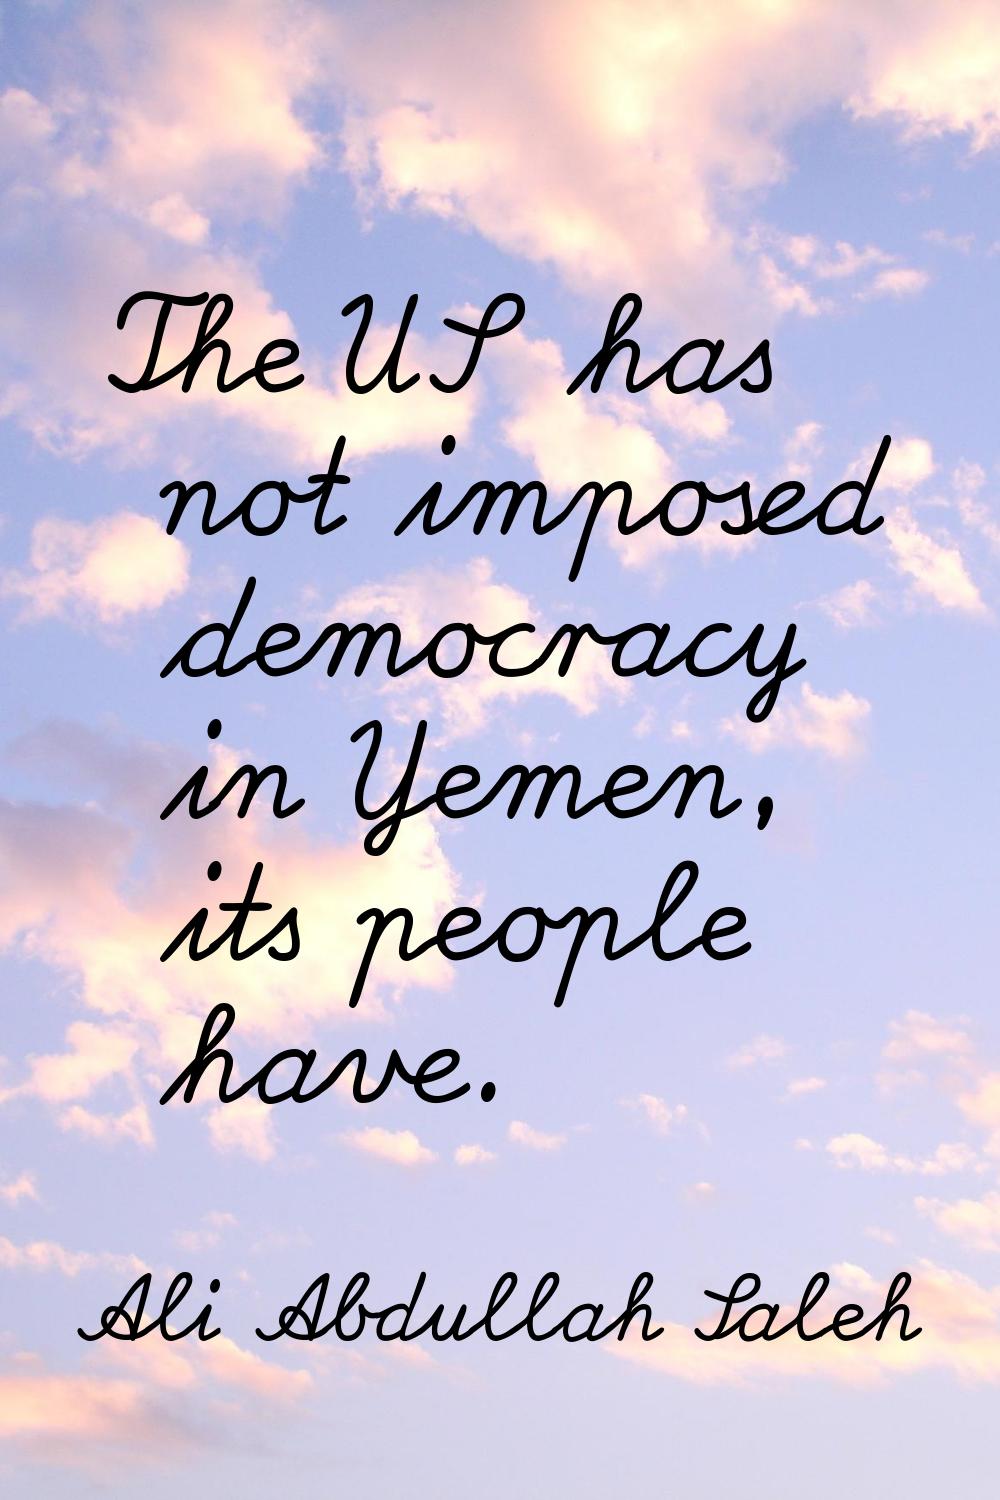 The US has not imposed democracy in Yemen, its people have.